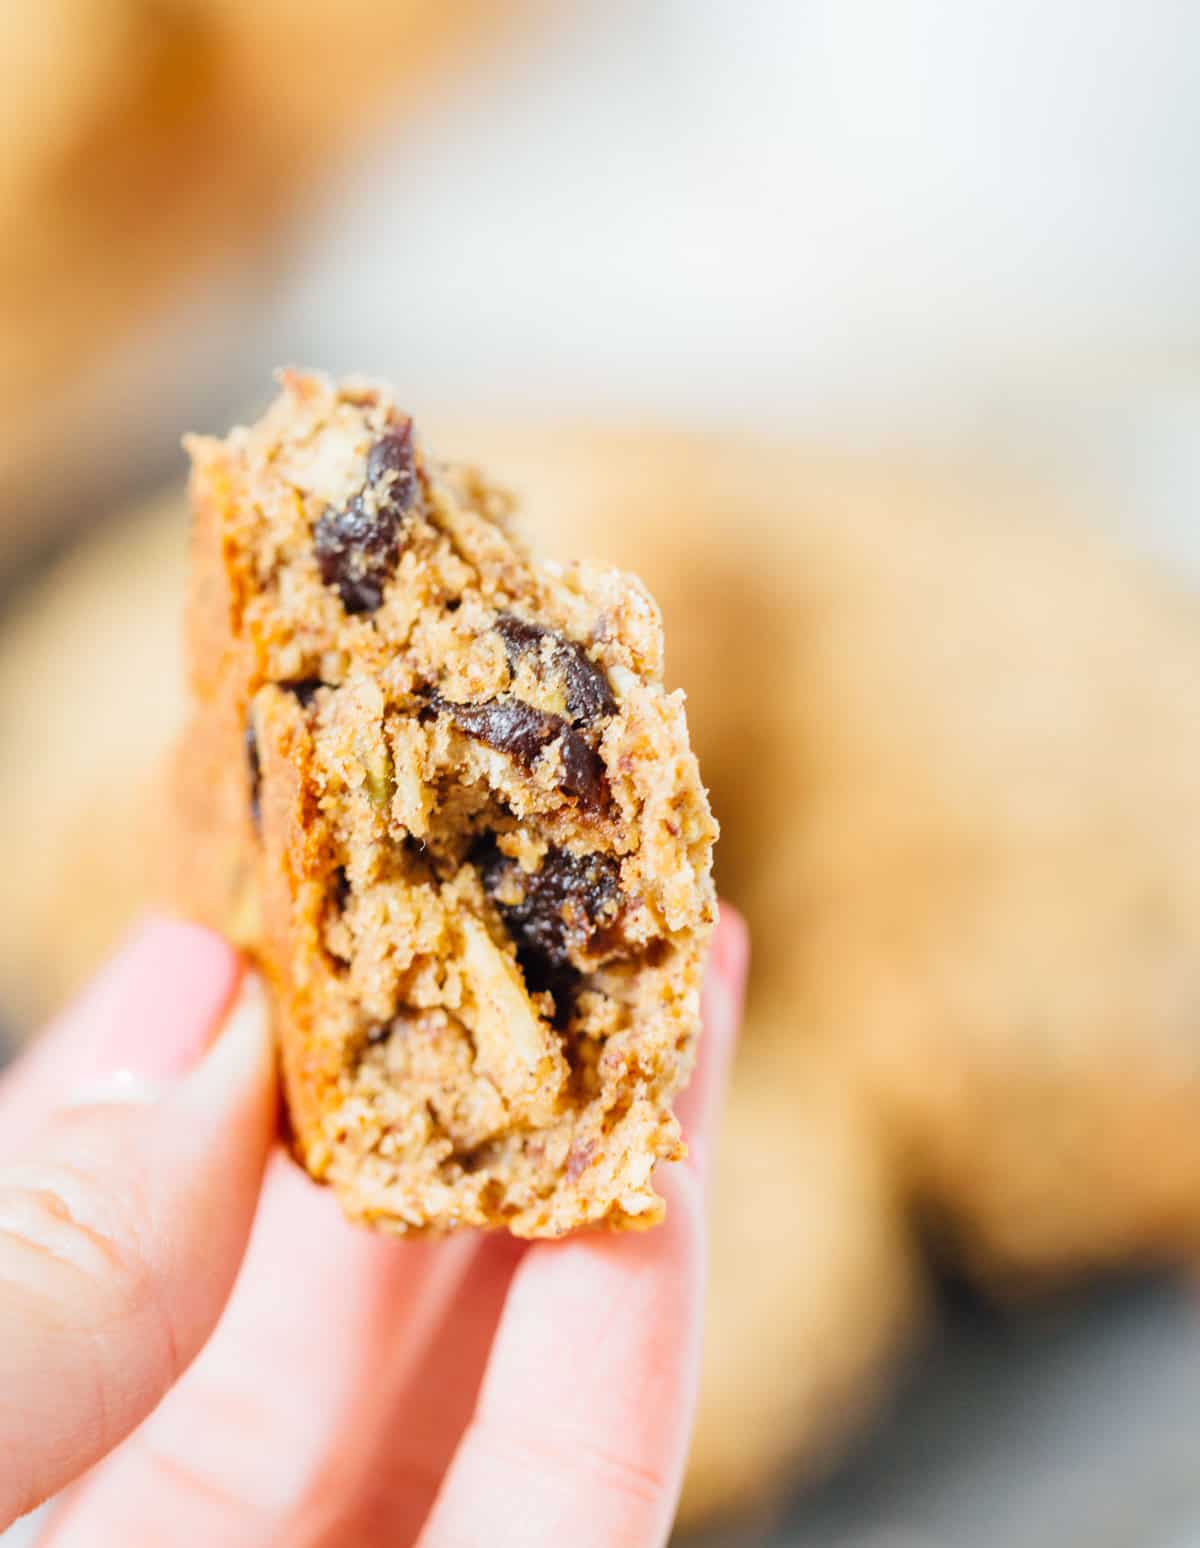 Naturally sweetened, vegan, and gluten-free. These breakfast cookies are a great on-the-go bite and good for any time of day! #cookies #breakfastcookies #glutenfreebaking #dairyfree #veganbaking #vegan #glutenfree #naturallysweetened